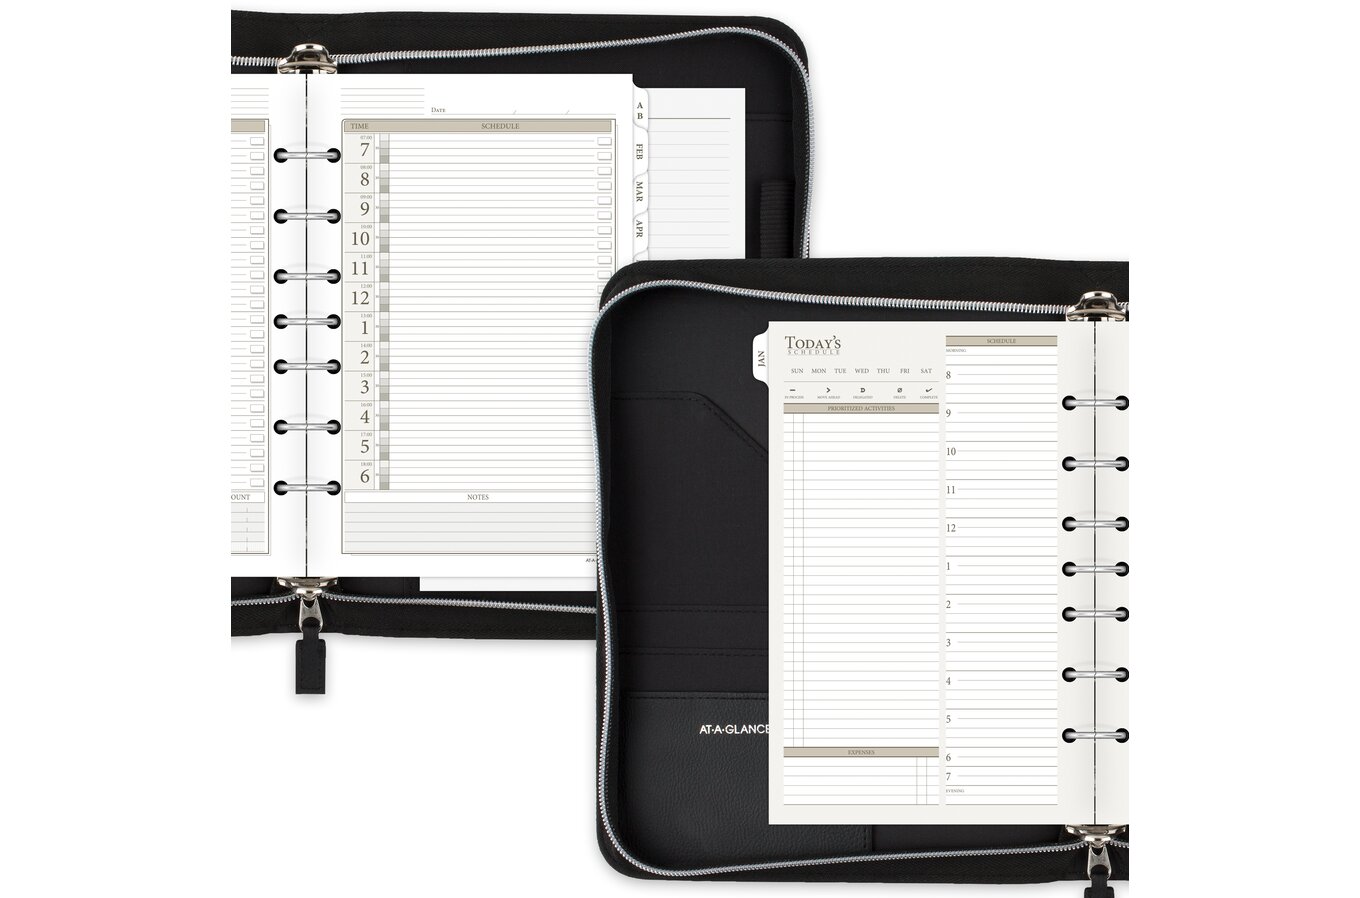 AT-A-GLANCE Faux Leather Fashion Undated Starter Sets, Desk Size, 5 1/2 x  8 1/2, Refillable Planners & Refills